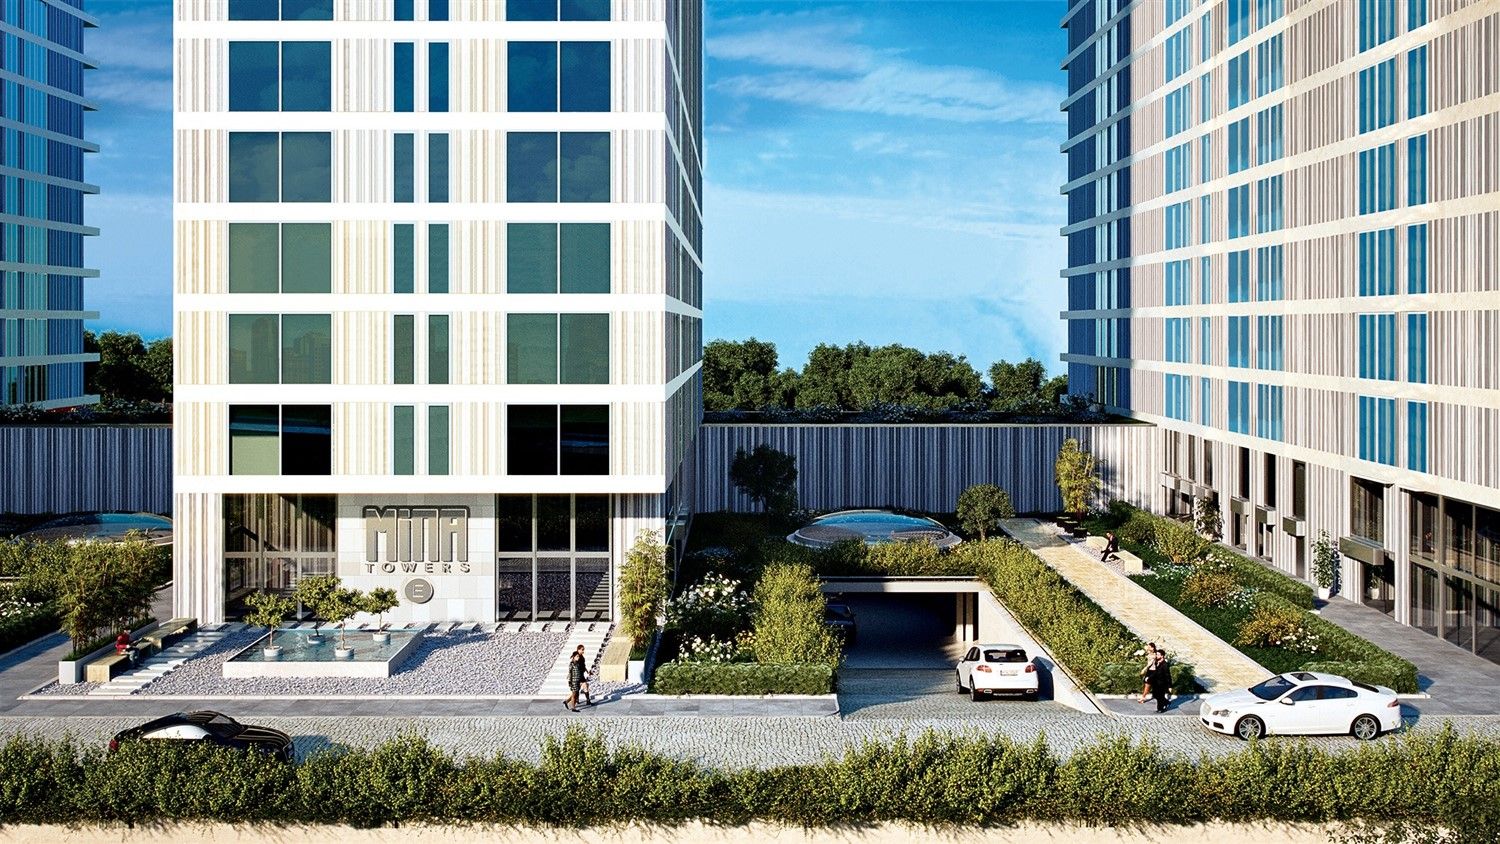 Large-scale and family-oriented project in Kadıköy district, İstanbul